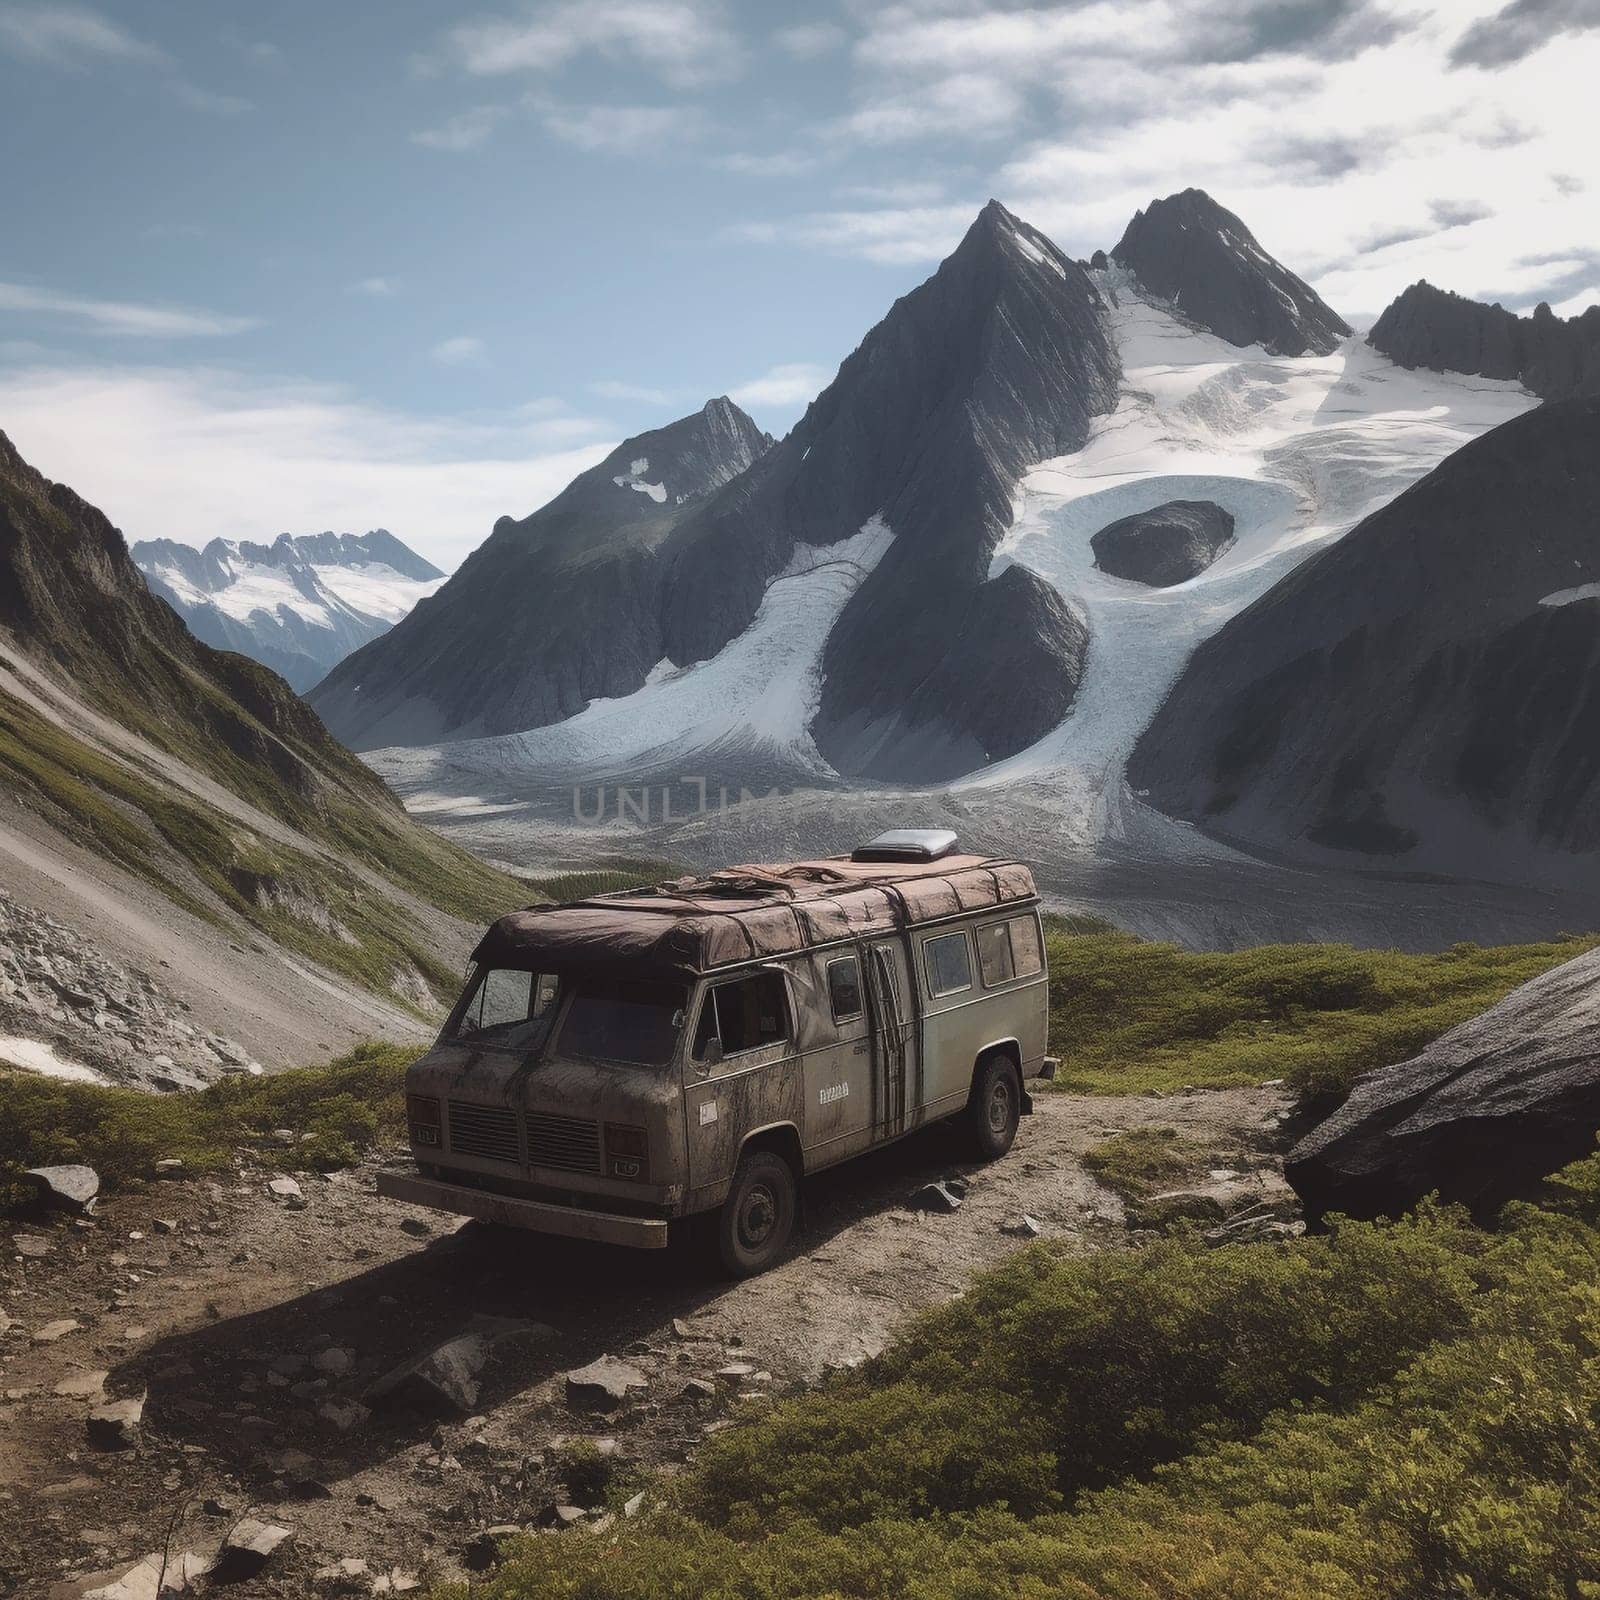 This incredible image features a rugged camper van parked on the edge of a remote wilderness area, with towering mountains and a glacier visible in the background. The van's exterior is covered in dirt and mud, suggesting that it has been on some exciting adventures in the past. On the roof of the van, a set of mountaineering gear is visible, indicating that the occupants are experienced and adventurous climbers. A small trail leads from the van into the wilderness, suggesting a day spent exploring the rugged terrain and enjoying the natural beauty of the area.